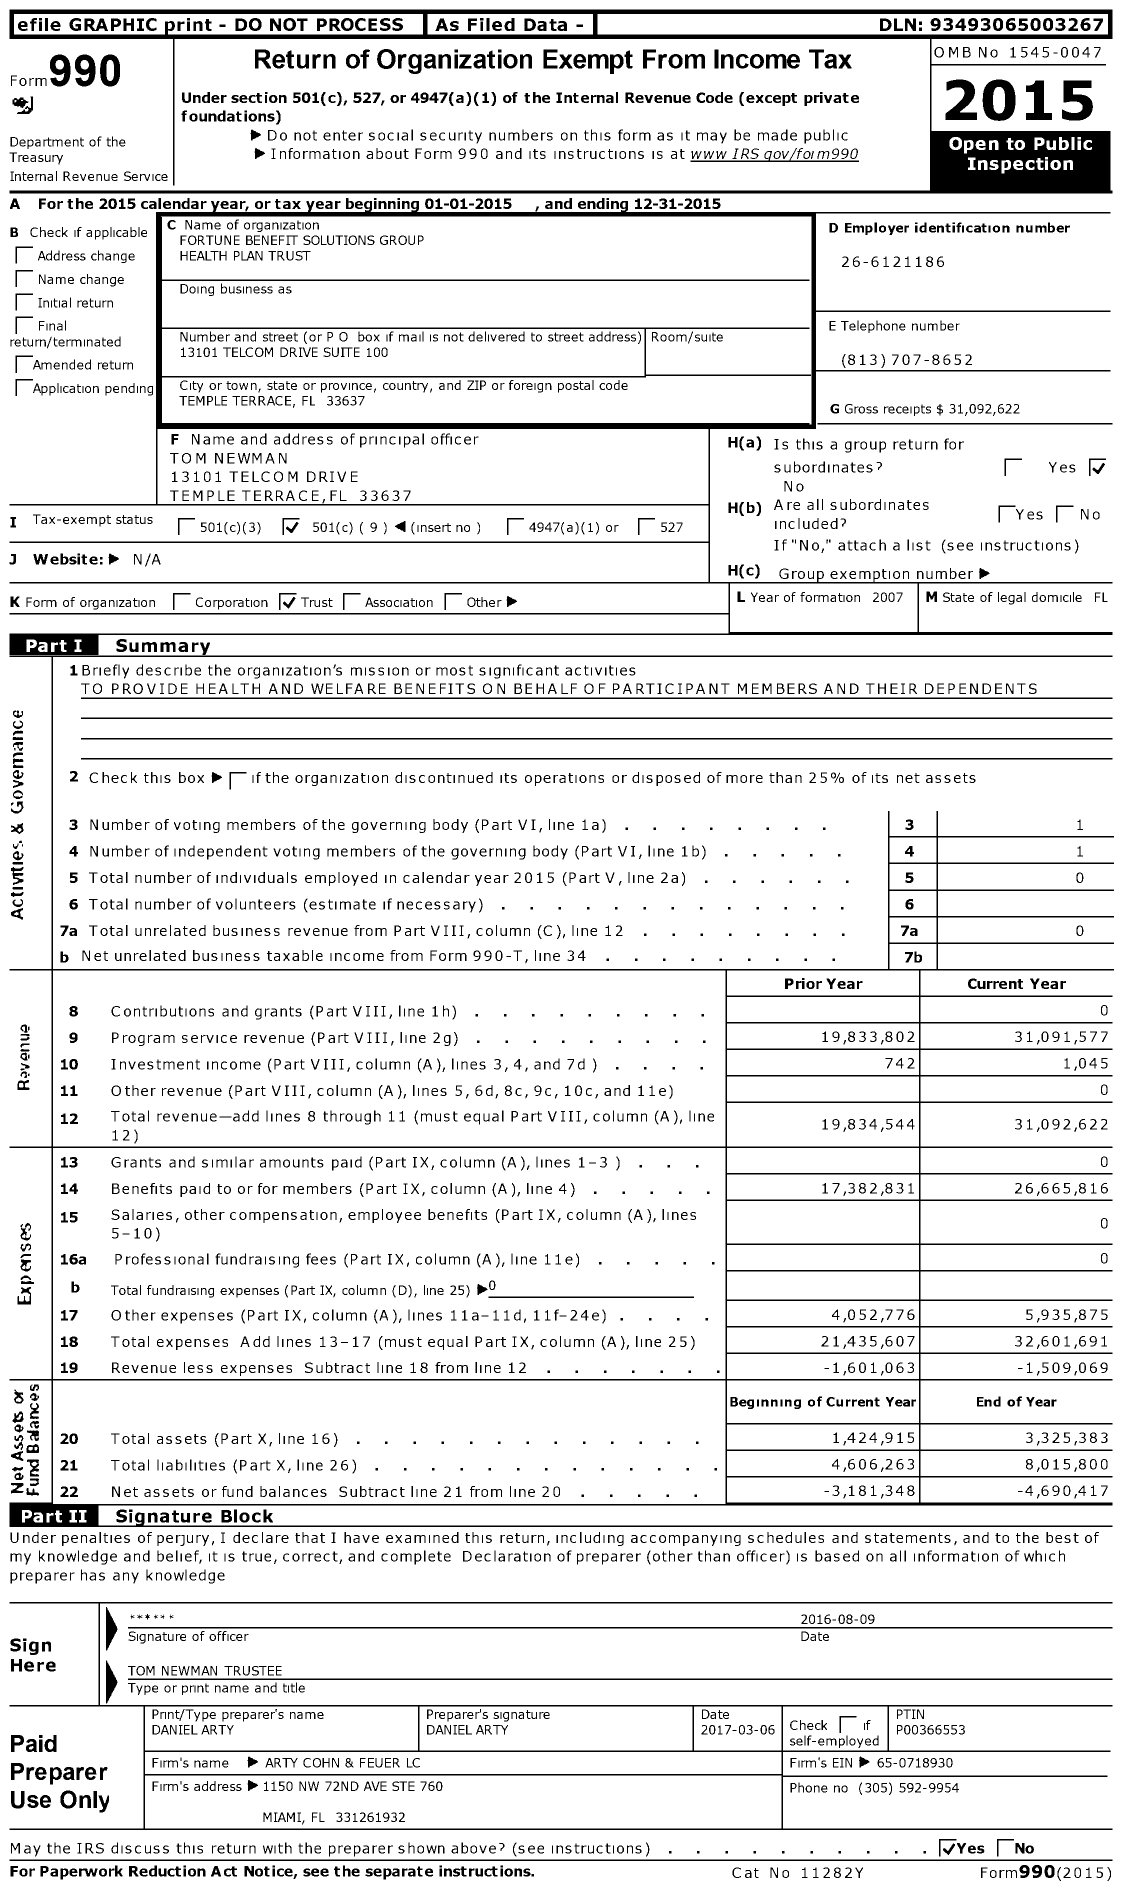 Image of first page of 2015 Form 990O for Fortune Benefit Solutions Group Health Plan Trust